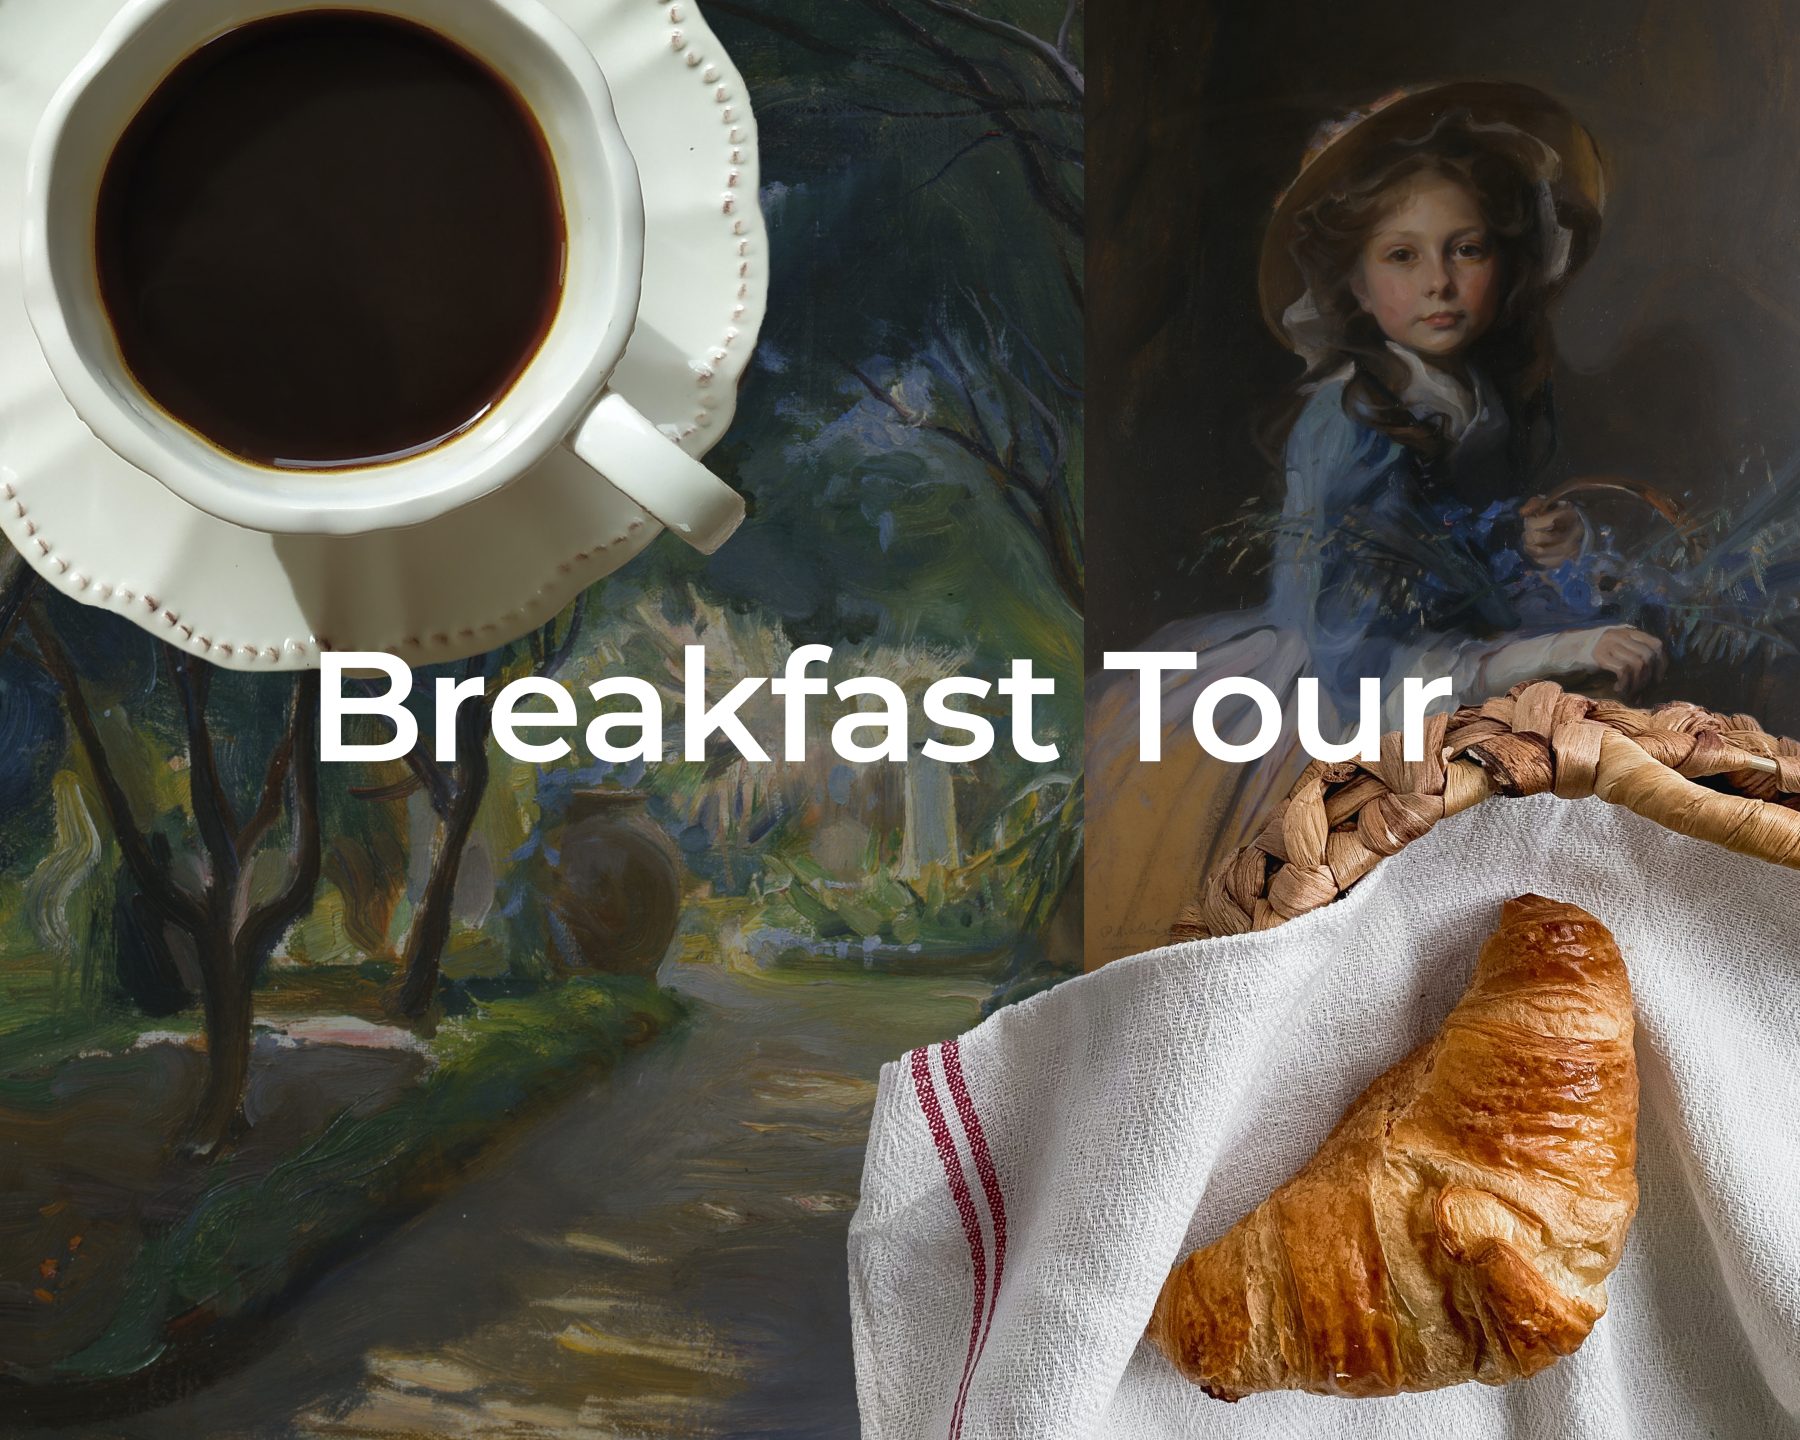 An image of two paintings by Philip de László are in the background with the words 'Breakfast Tour' overlayed. There is also an image of a coffee and a croissant overlayed.